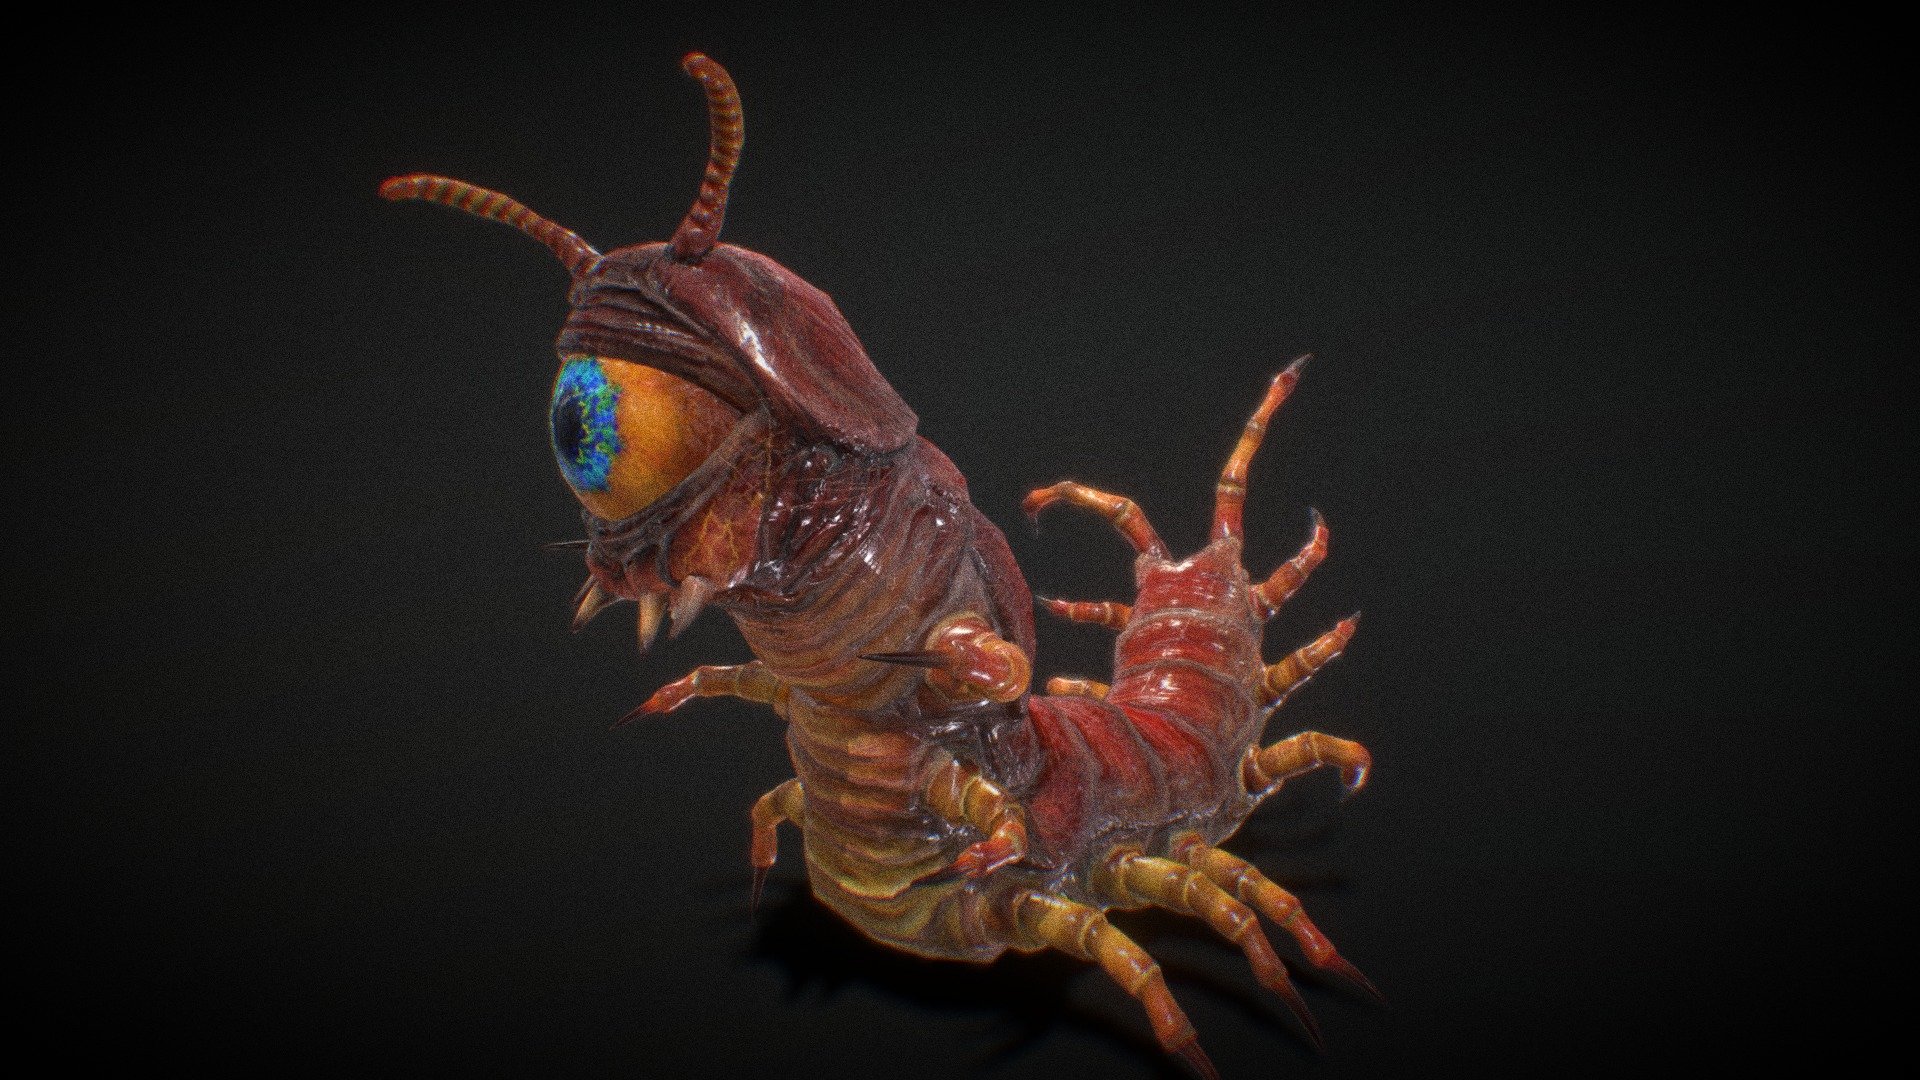 Oculon, Eyeball Centipede Monster, Rigged and Animated. Game ready.

Concept: A sort of centipede eyeball monster inspired from a popular classic game.




Rigged.

Low poly density.

Game ready.

Animations included.

Easy to pose, easy to animate.

4096 x 4096 res texture and normal maps.

Includes Blender 3d File, Original (Renders in Cycles) 

This model was created for use in a game engine, but the detail has been retained for higher-resolution and general applications 3d model